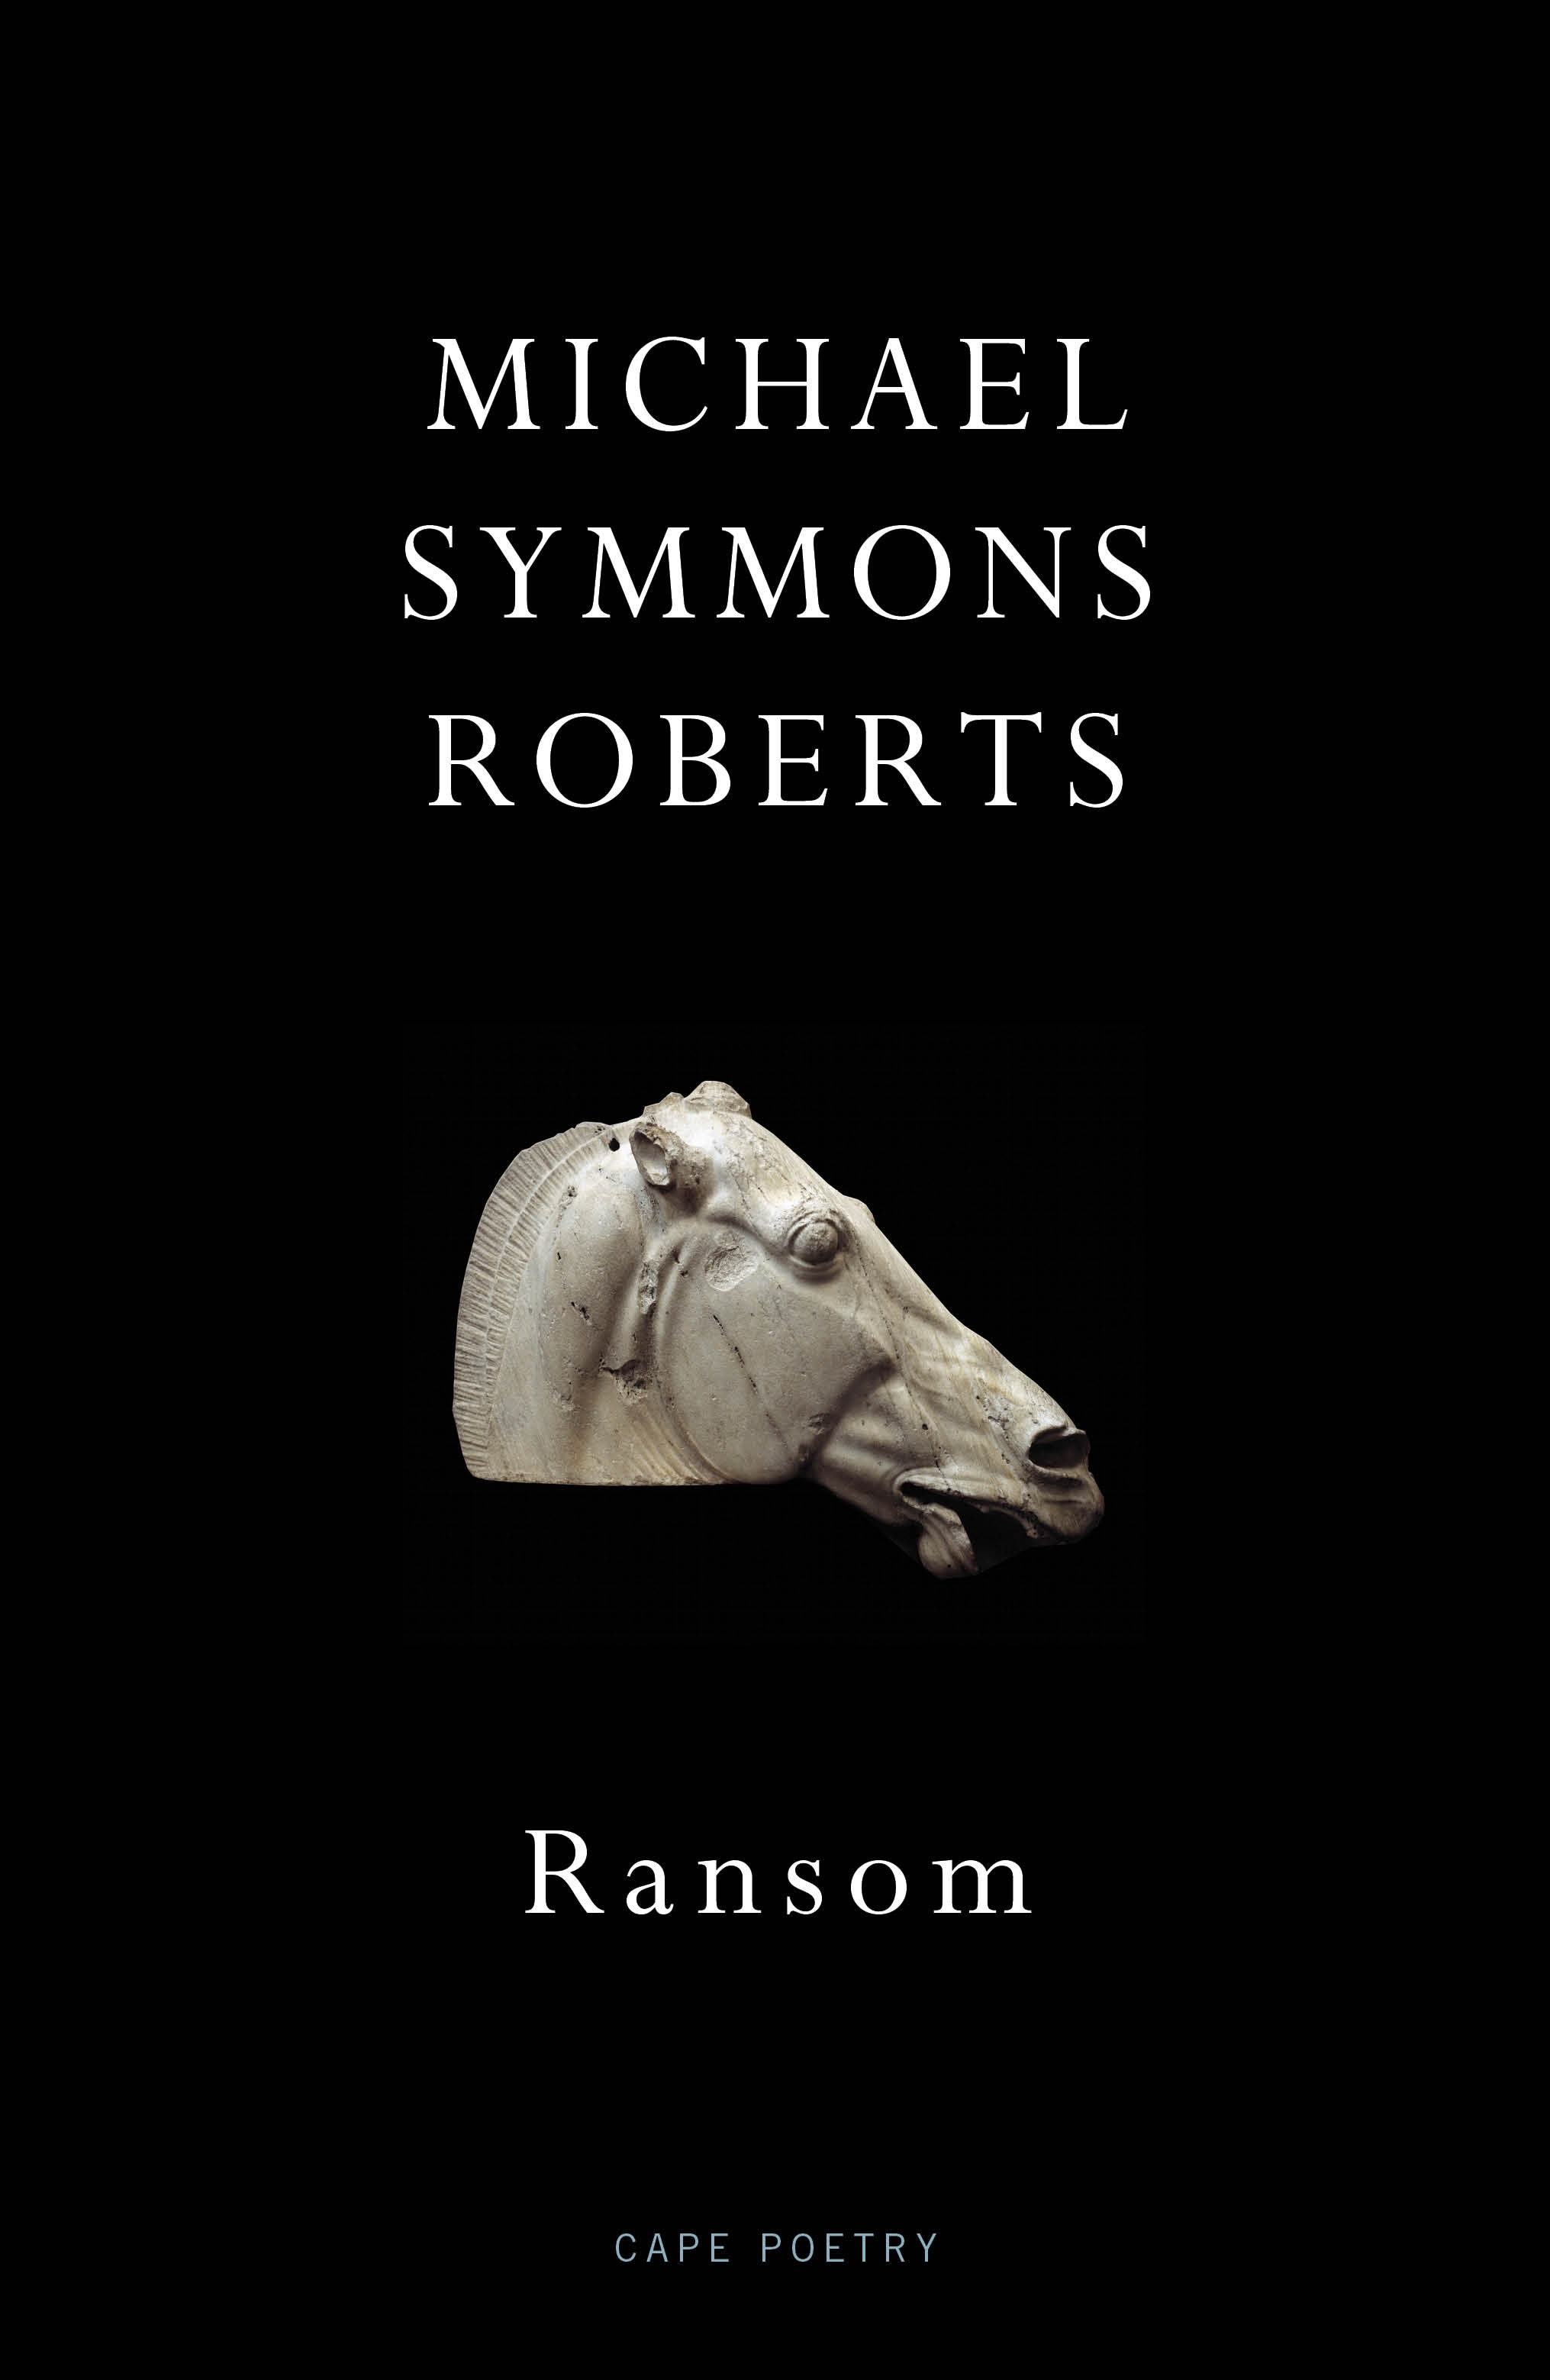 Book “Ransom” by Michael Symmons Roberts — March 18, 2021